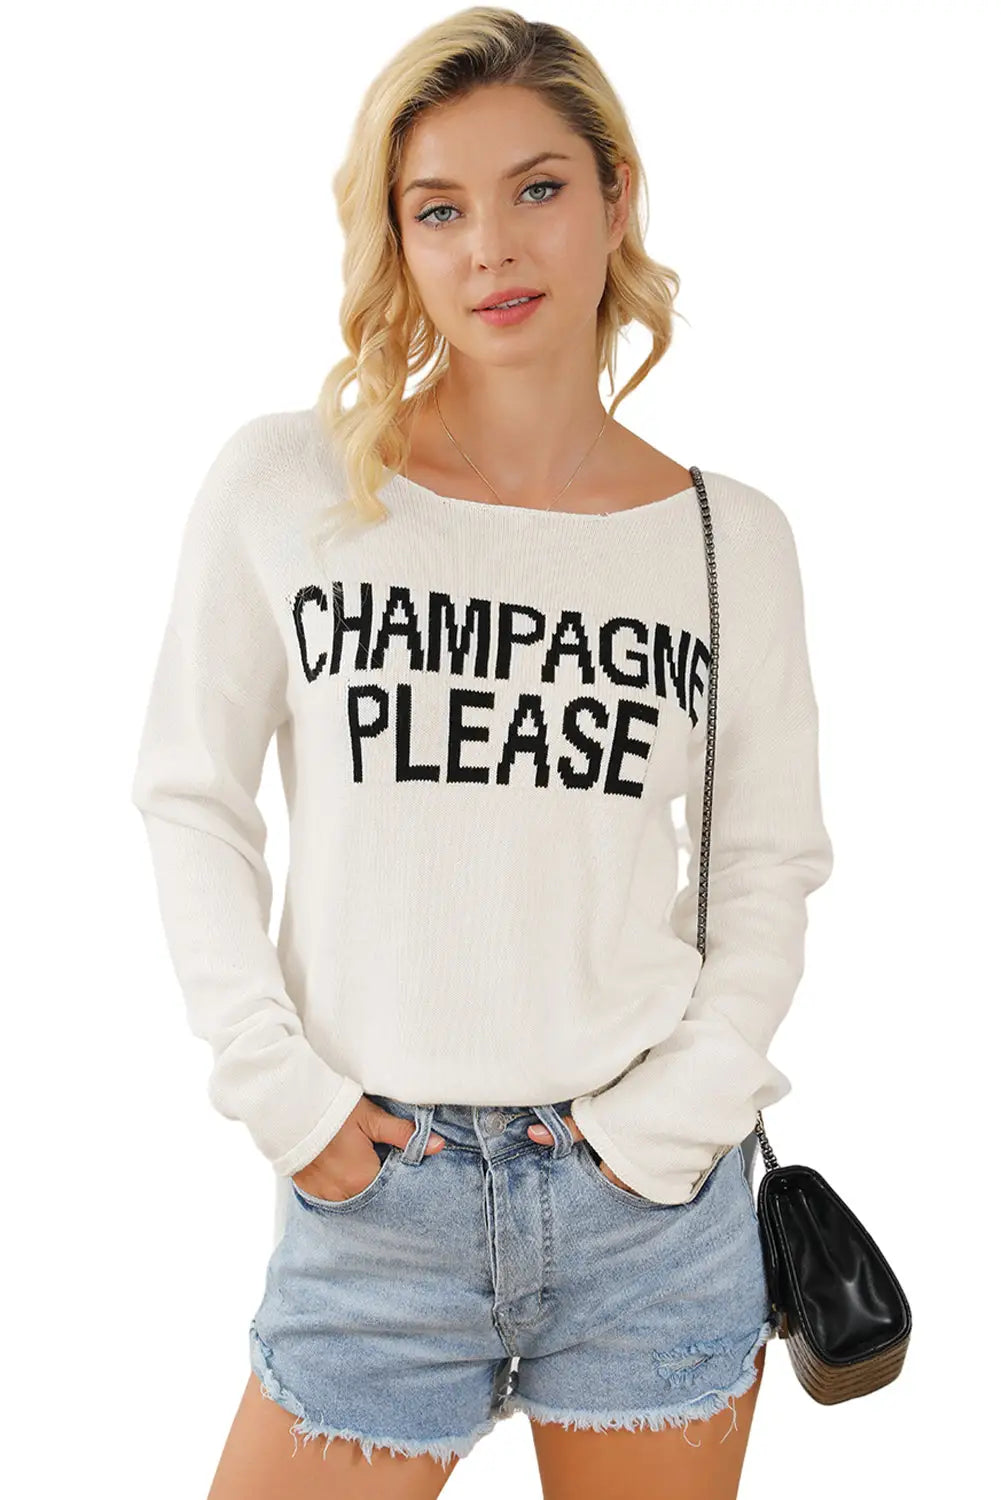 Desert palm champagne please graphic sweater - sweaters & cardigans